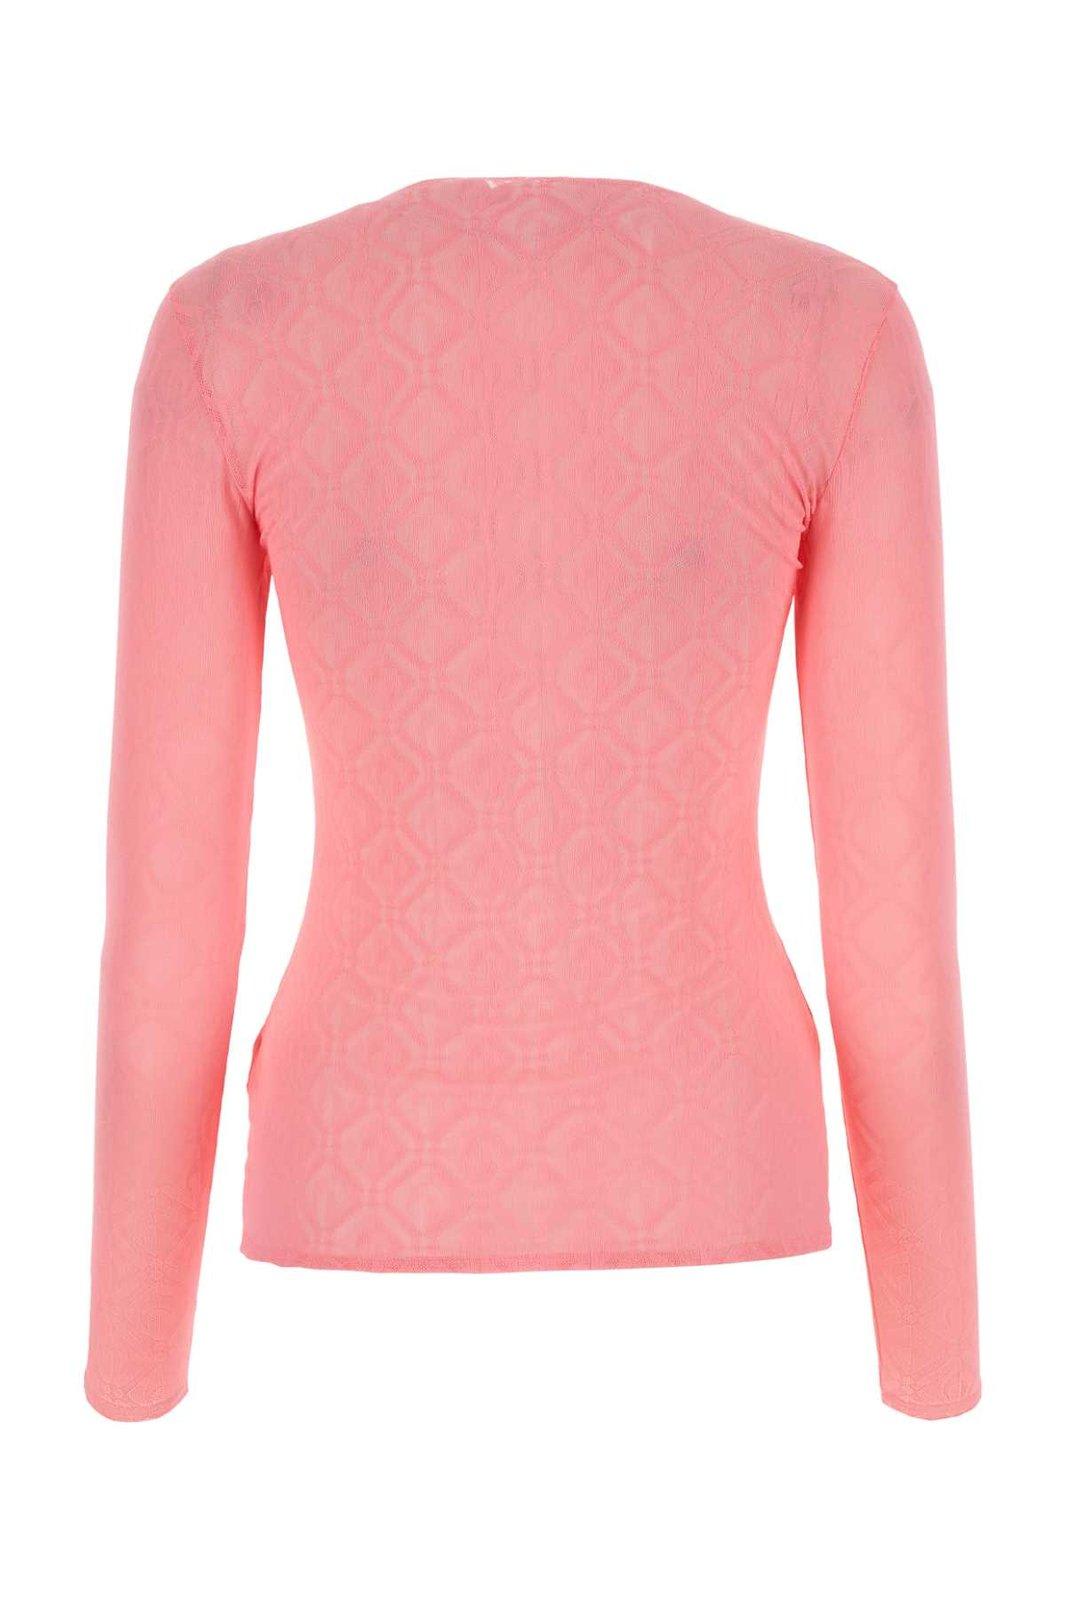 Shop Marine Serre Crescent Moon Long Sleeved Top In Pink